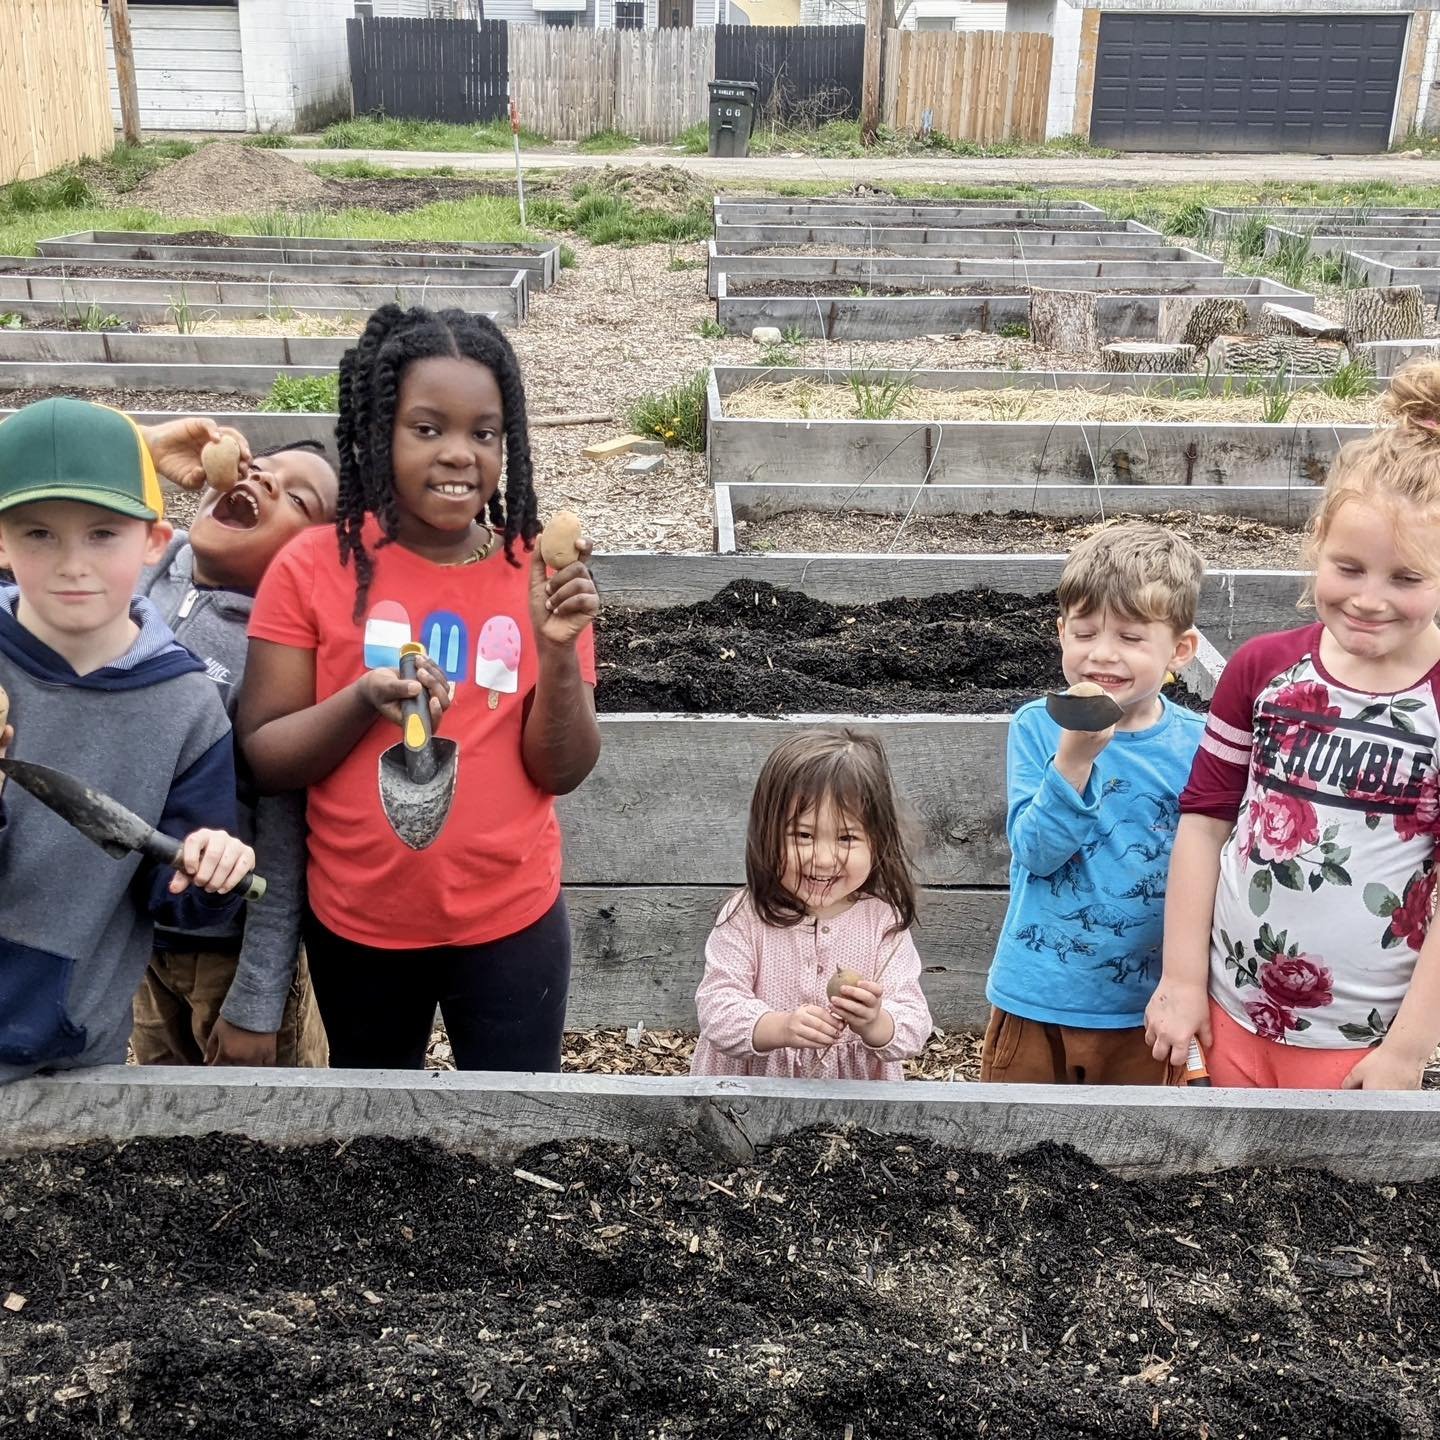 🥔 The Garden Club gang recently had a blast getting their hands dirty planting spuds! 

With Ms. Nadia as their green-thumbed guru, they carefully followed her every gardening tip. They dug, they planted, and they chatted excitedly about the mammoth